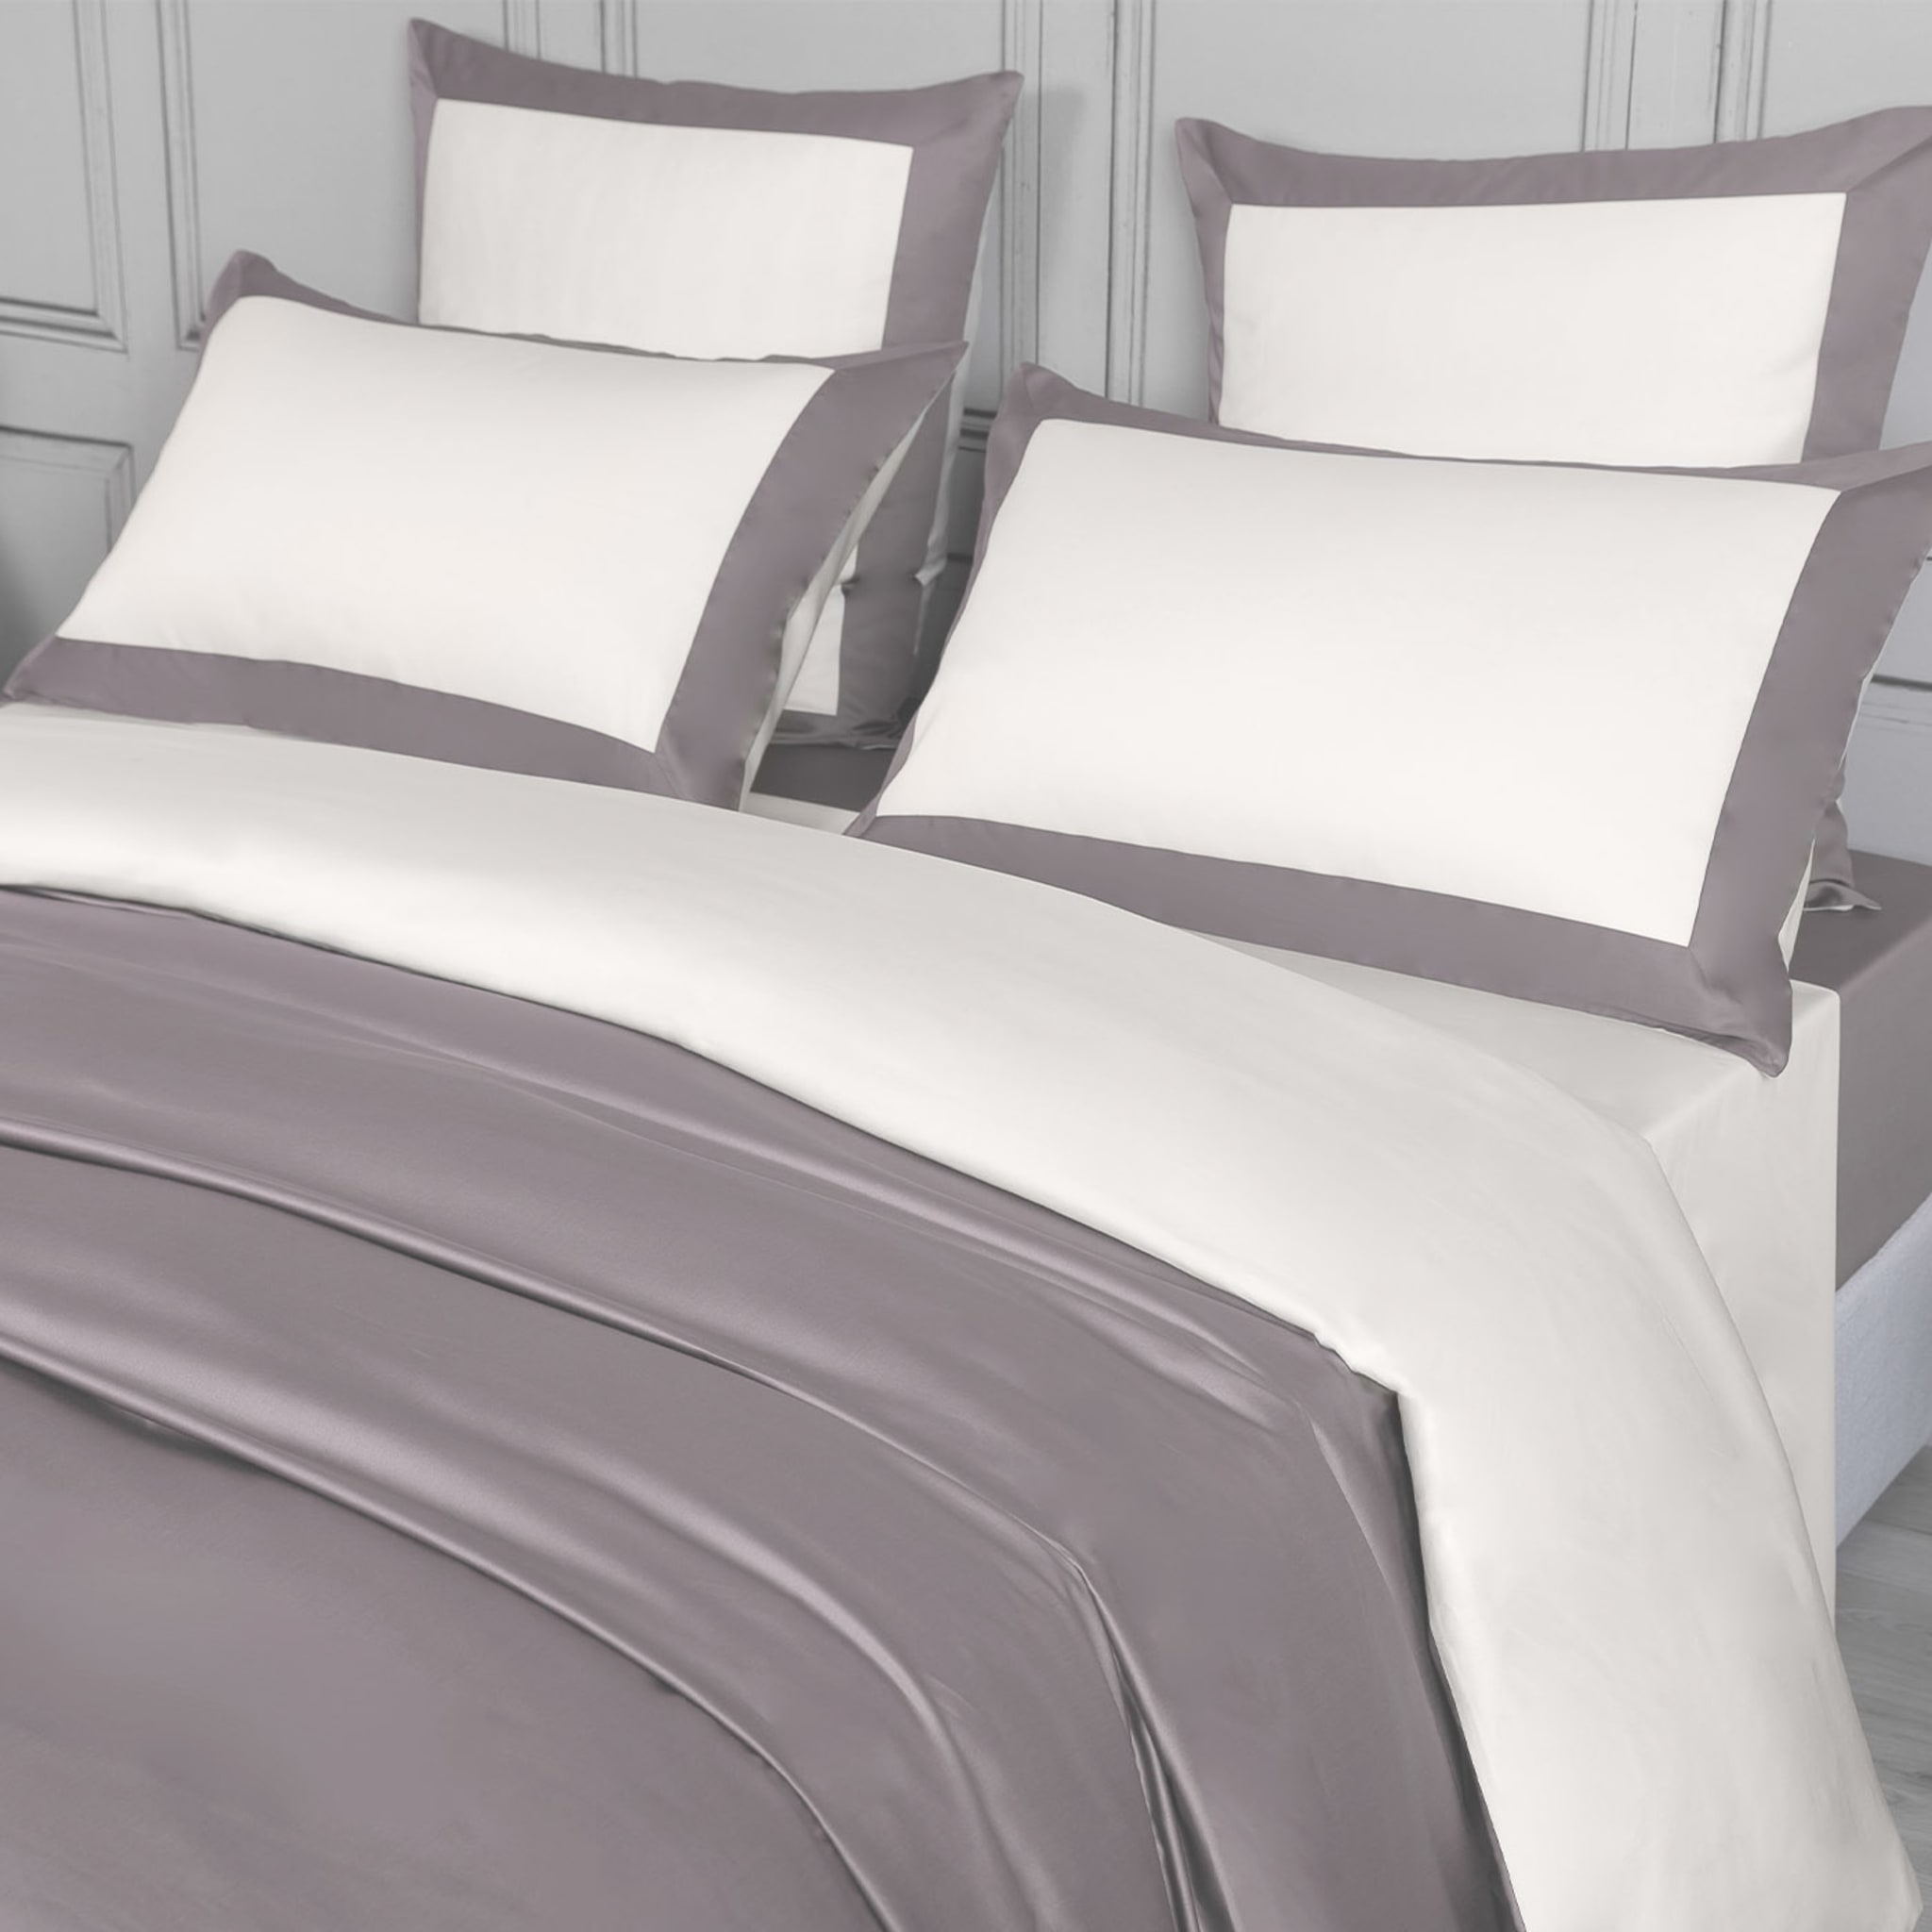 Apollo Set of Pearl & Lead-Gray Duvet Cover and 2 Pillowcases - Alternative view 1